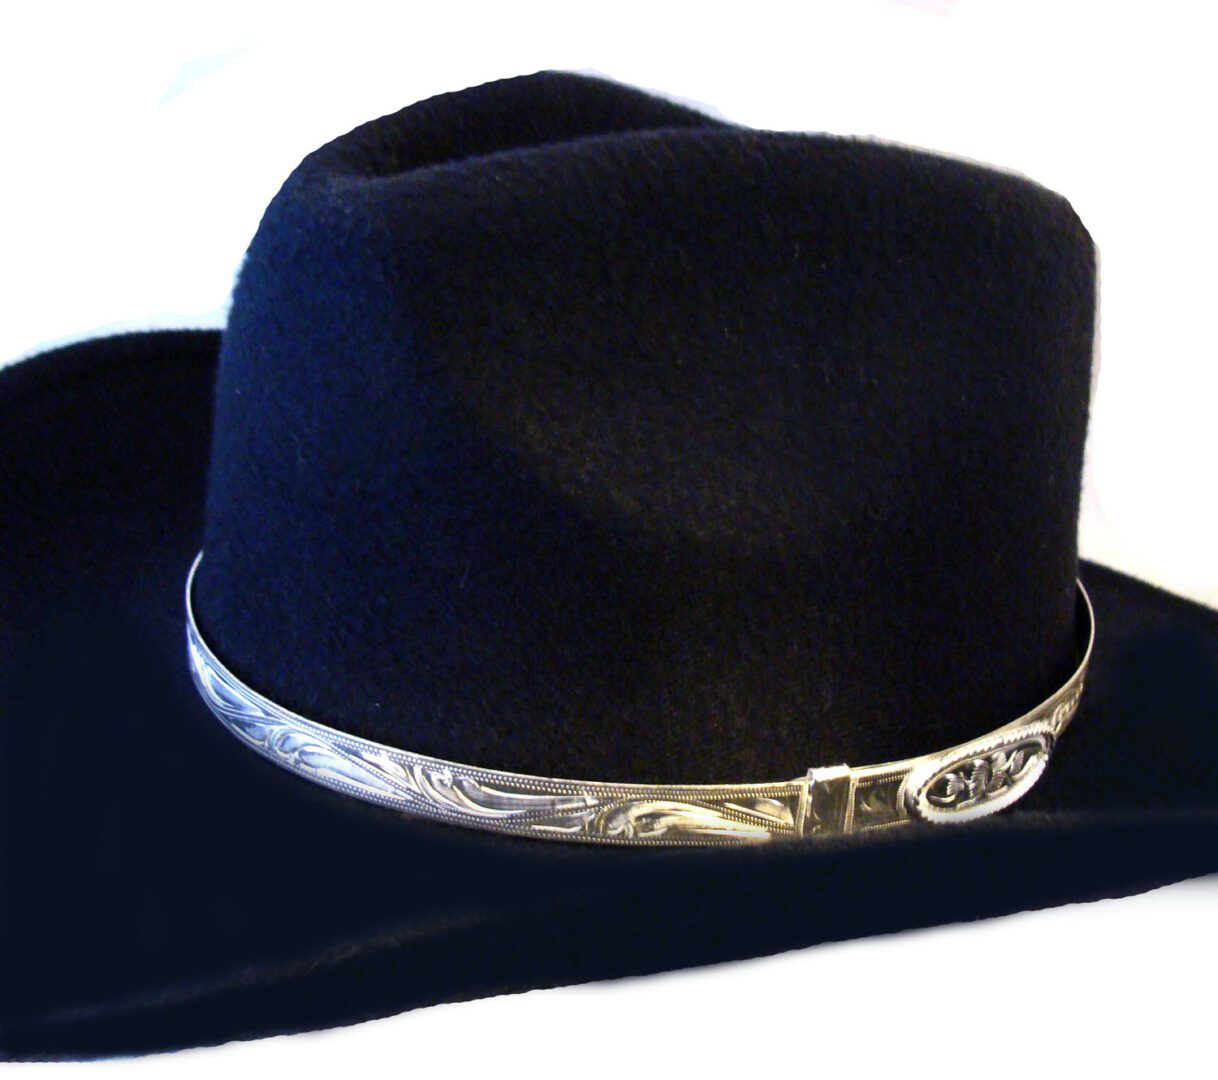 Western Hat Band for Cowboy Hats by Silver Canyon, Black Leather